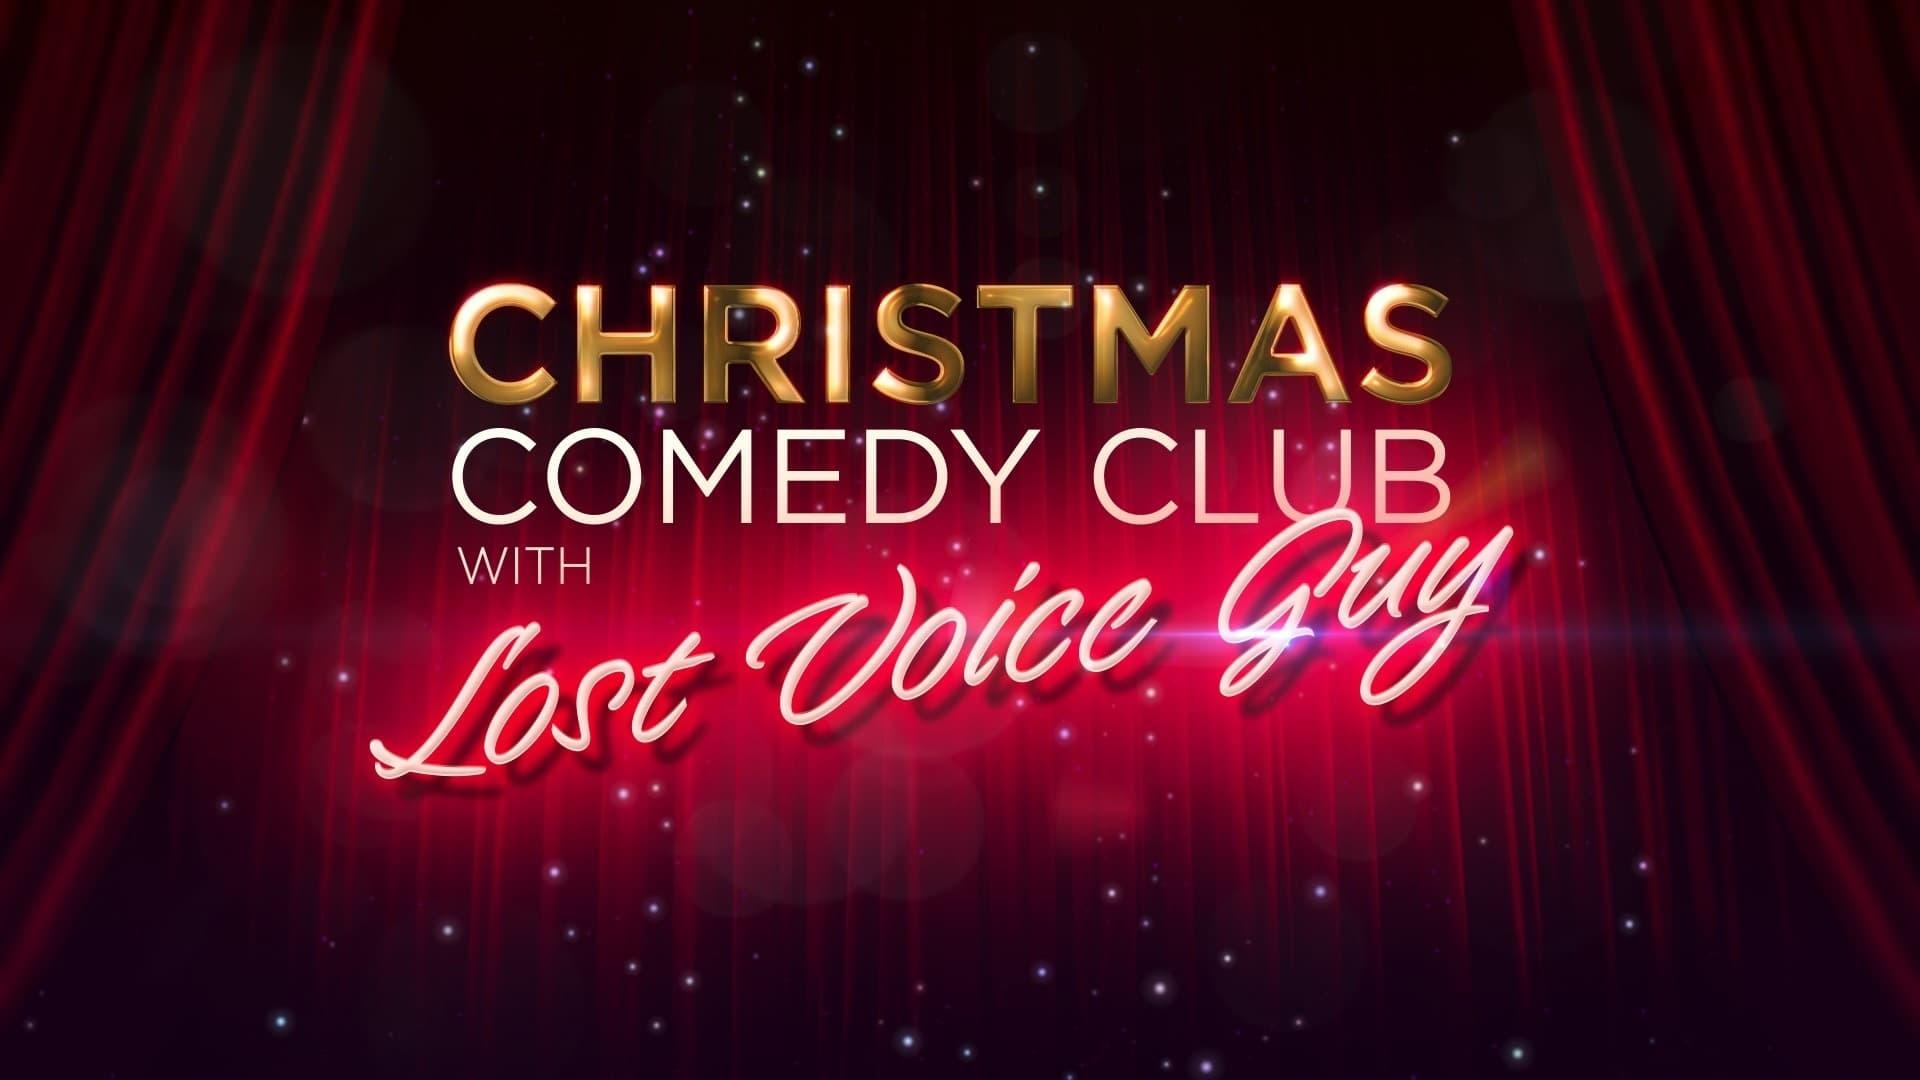 Christmas Comedy Club with Lost Voice Guy backdrop